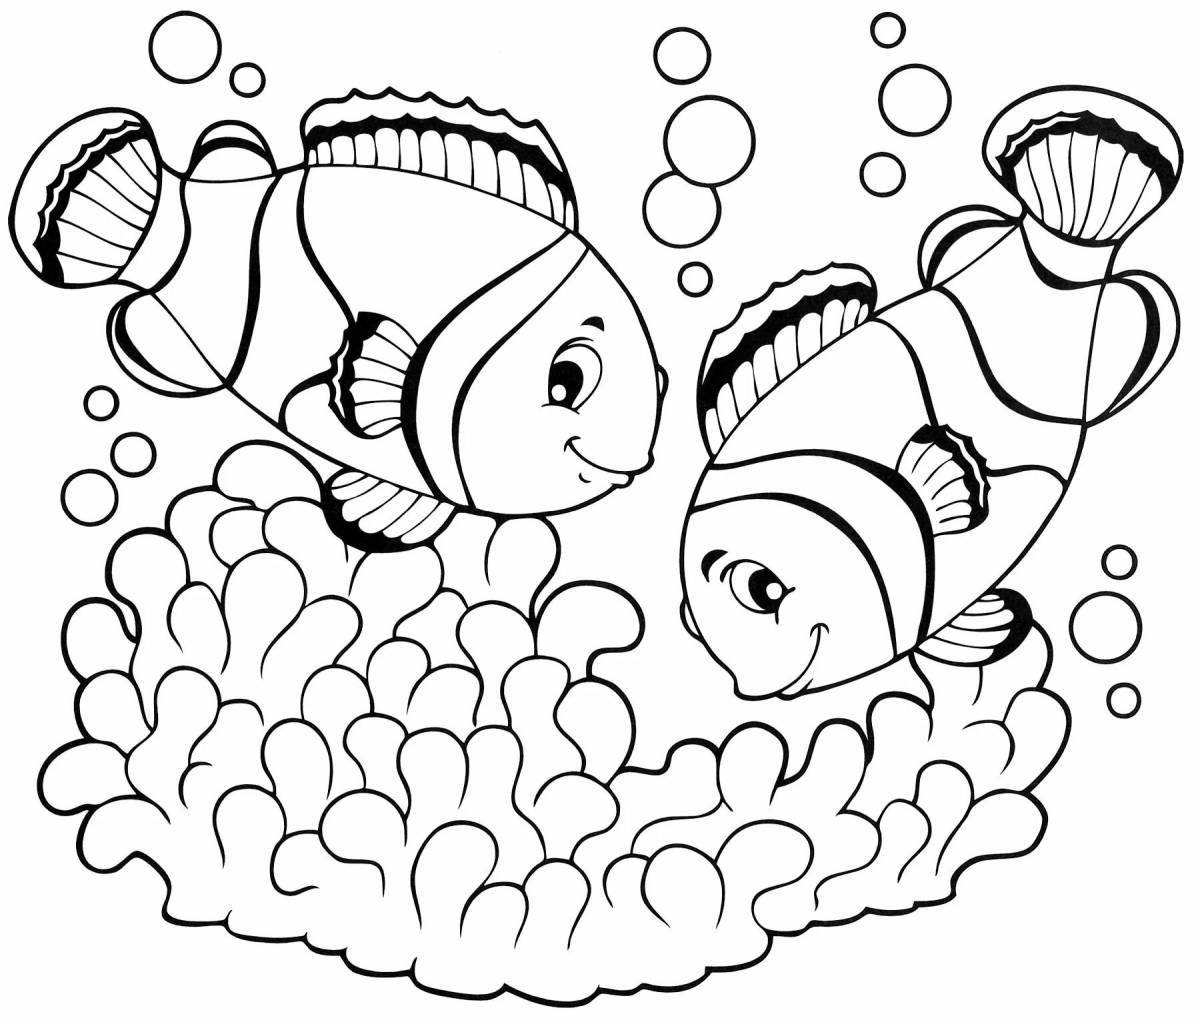 Coloring page dazzling clownfish